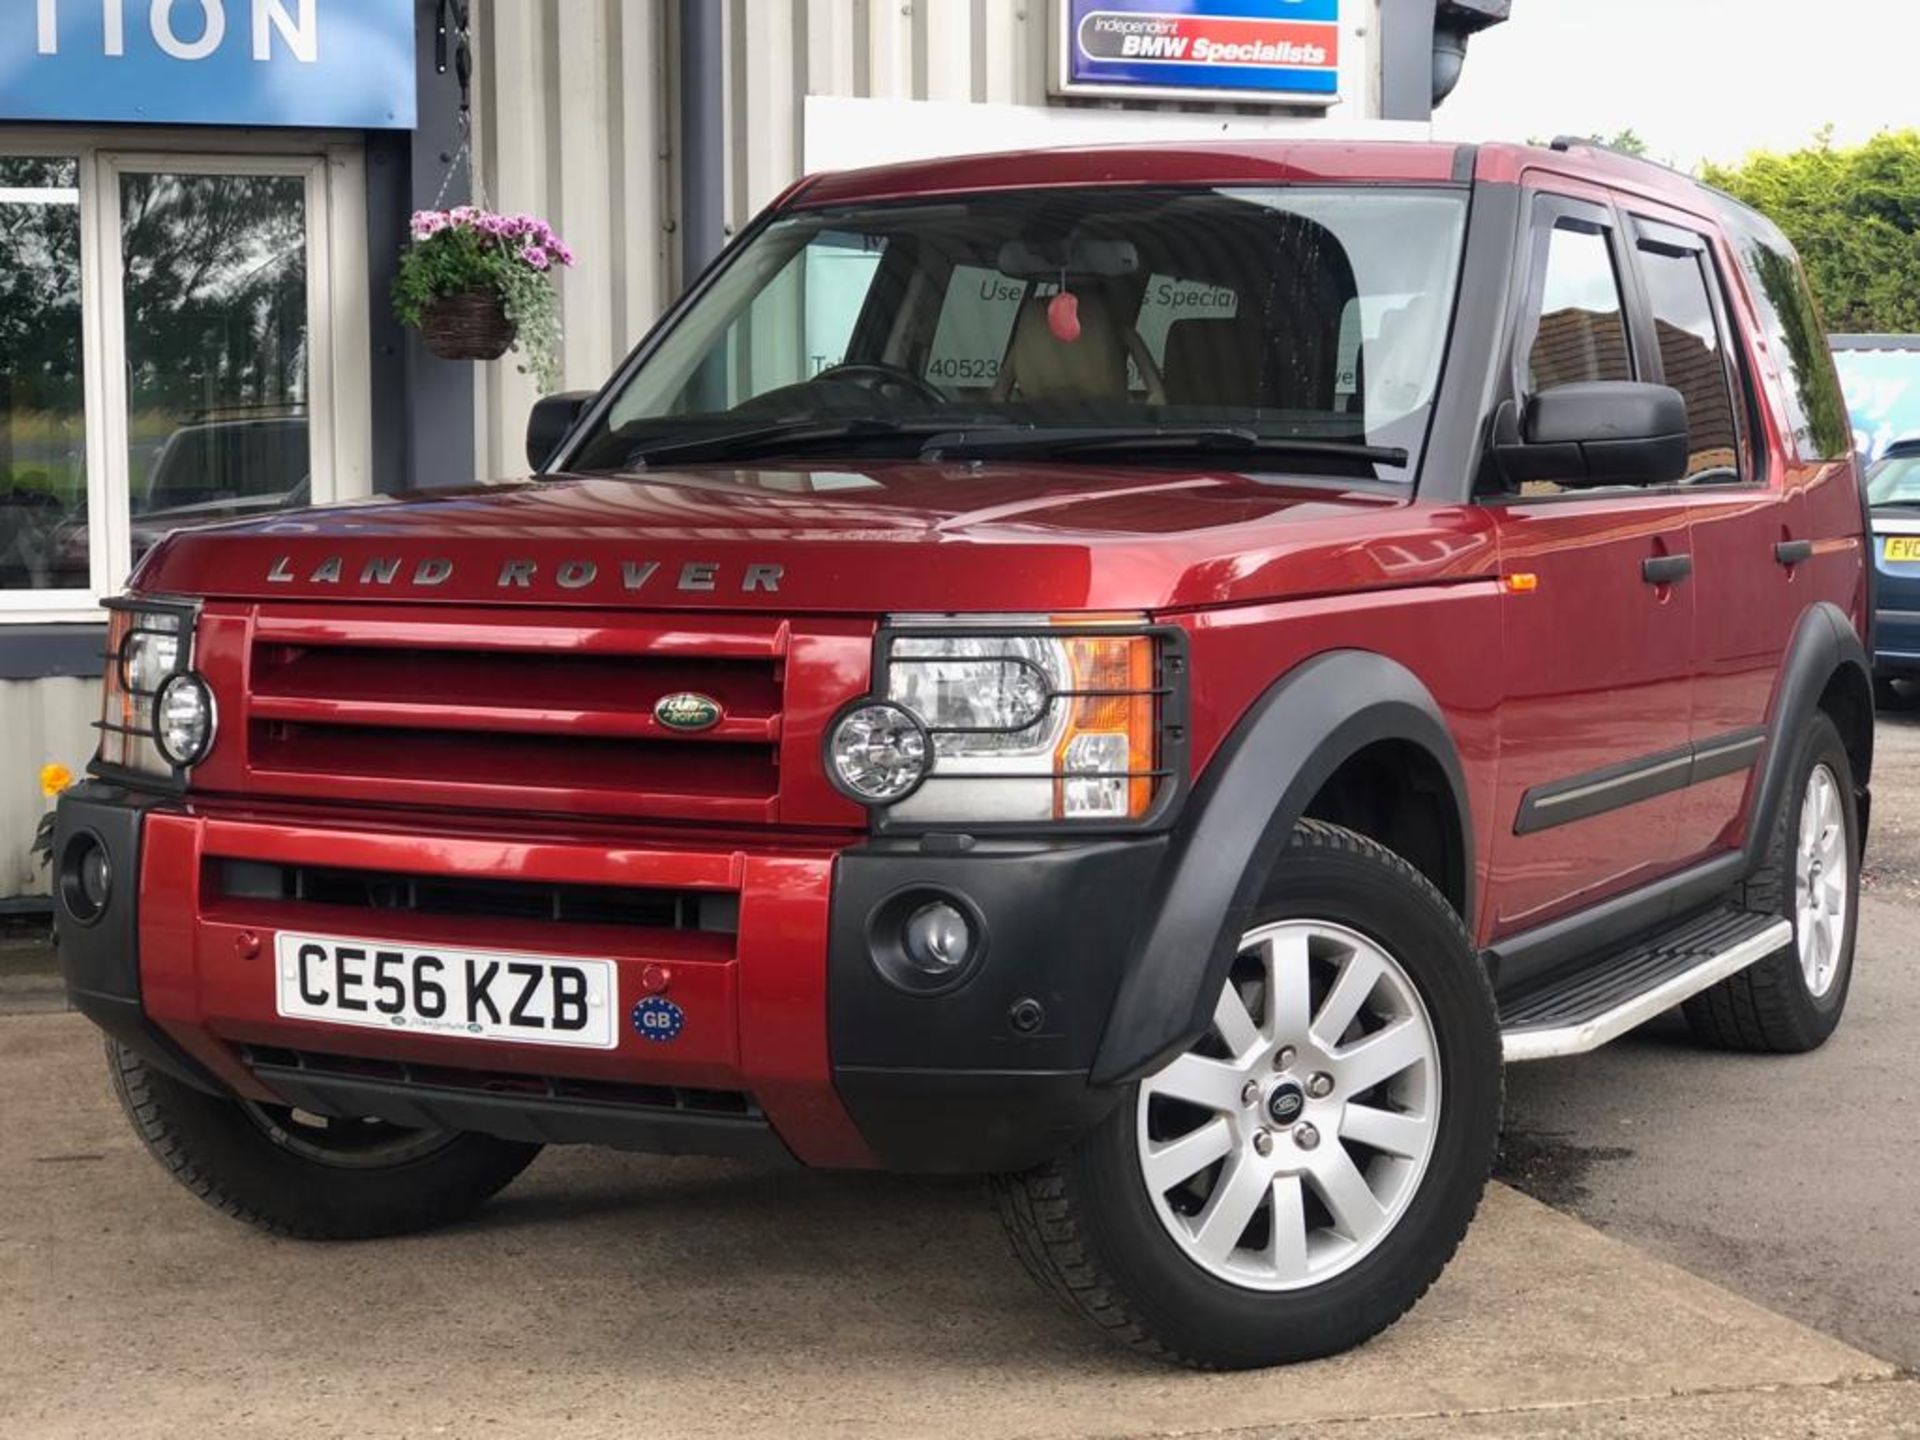 2006/56 REG LAND ROVER DISCOVERY 3 TDV6 SE AUTO 2.7 DIESEL 4X4 RED 7 SEATER *NO VAT* - Image 2 of 21